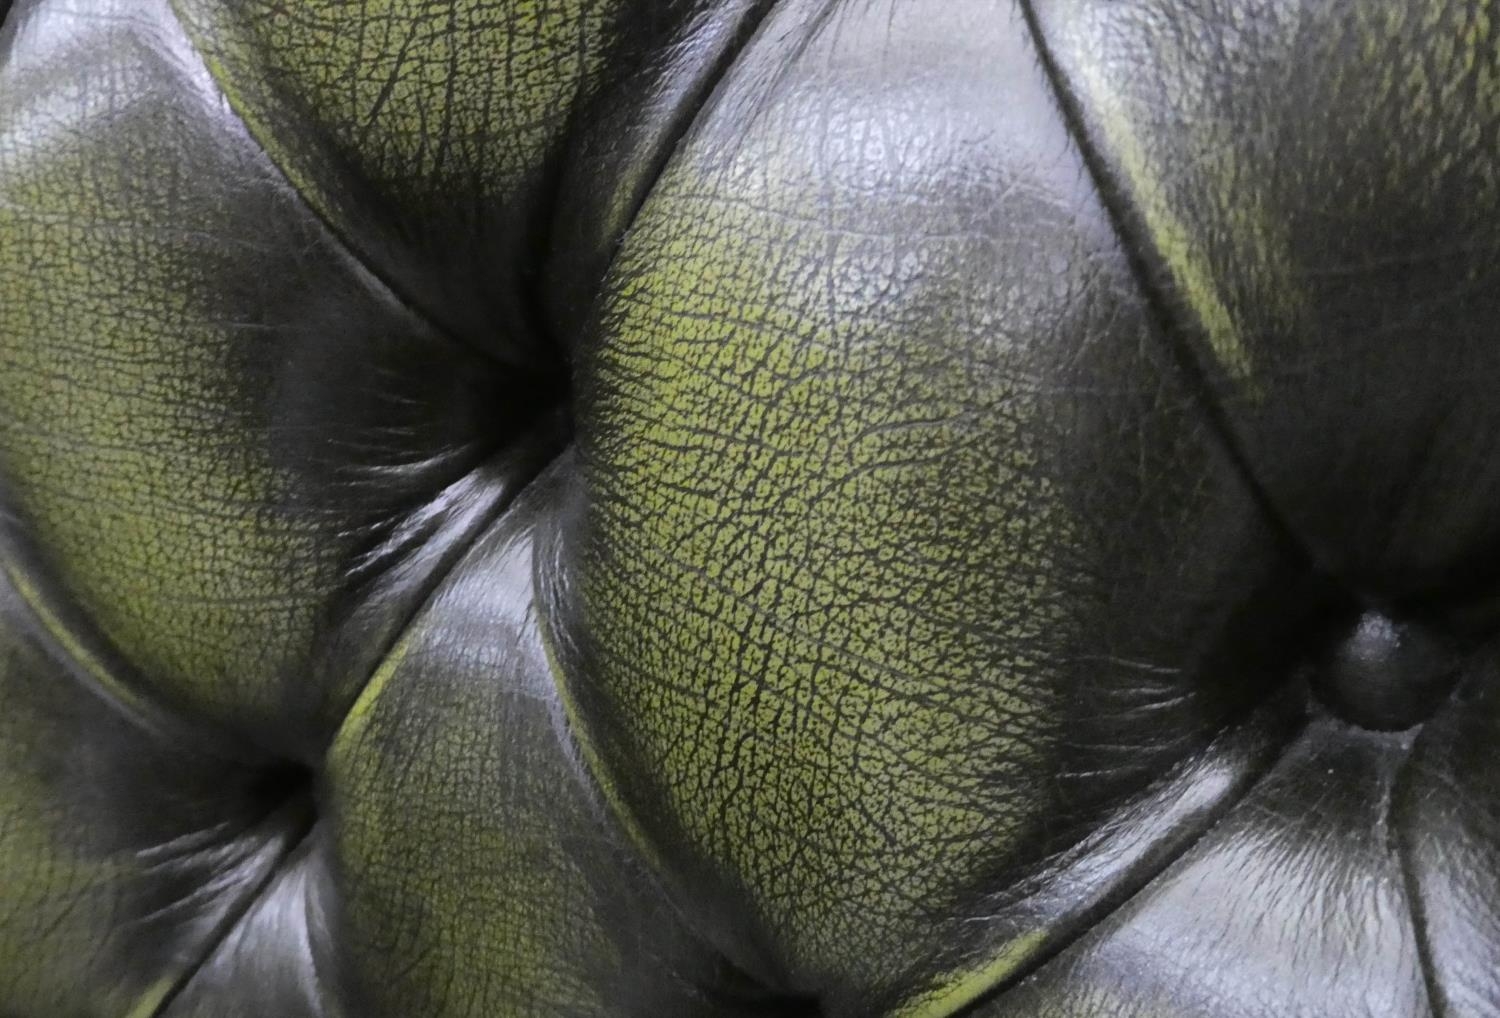 DESK CHAIR, 85cm W x 120cm H, green buttoned leather. - Image 4 of 5